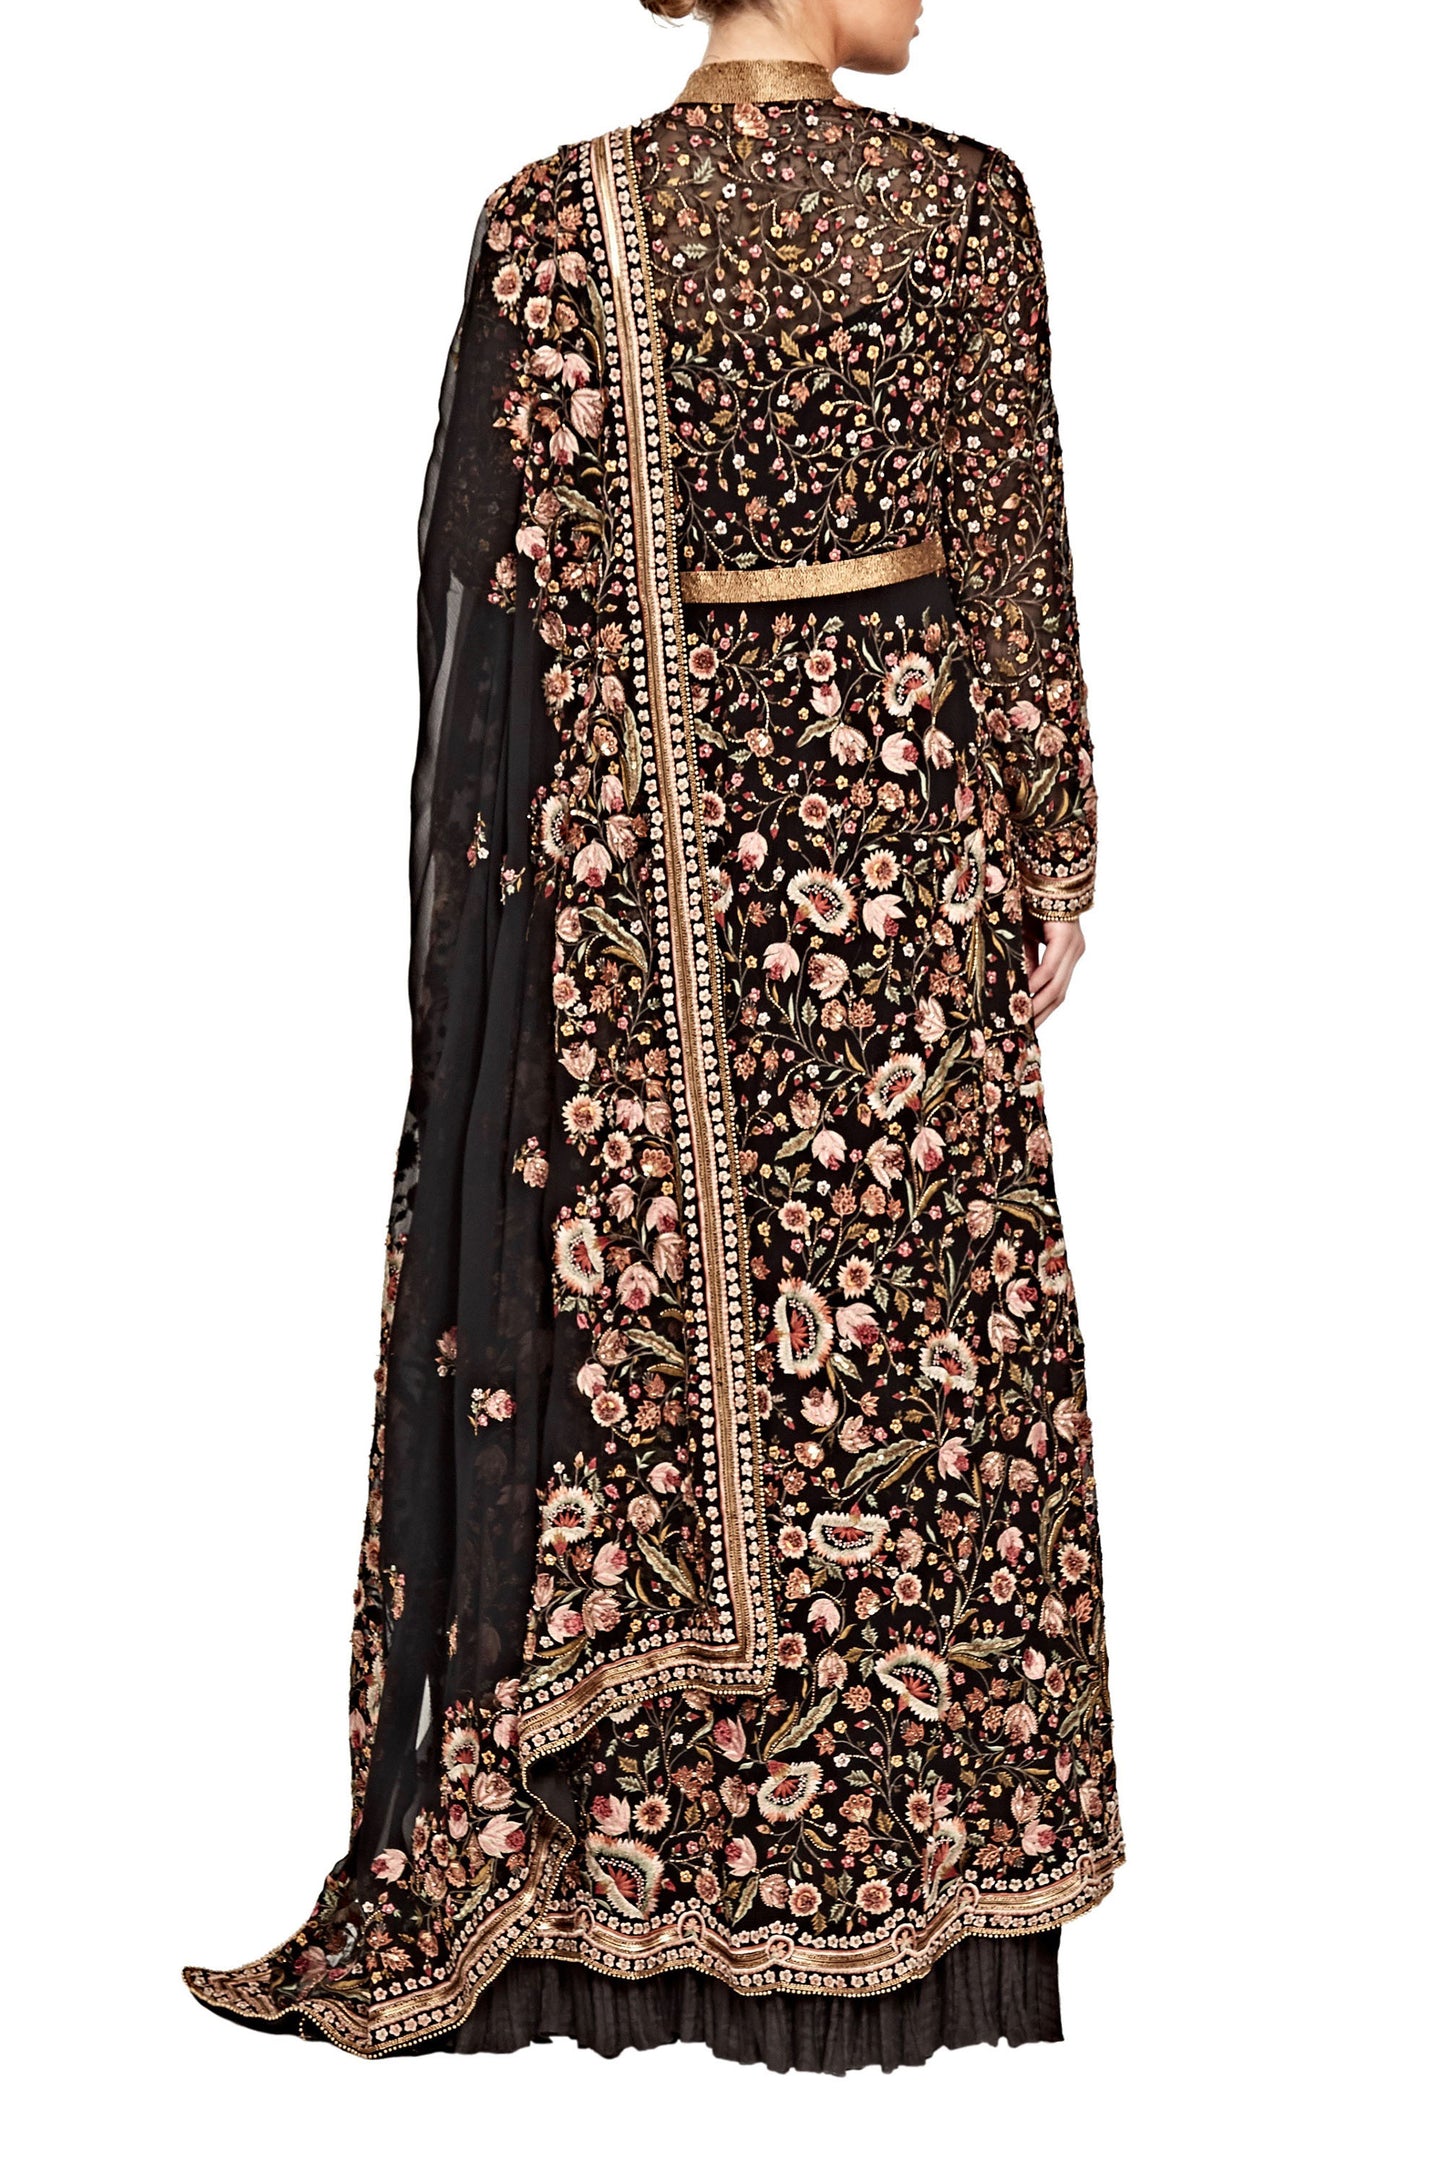 Jacket Set in Intricate Floral Thread Embroidery